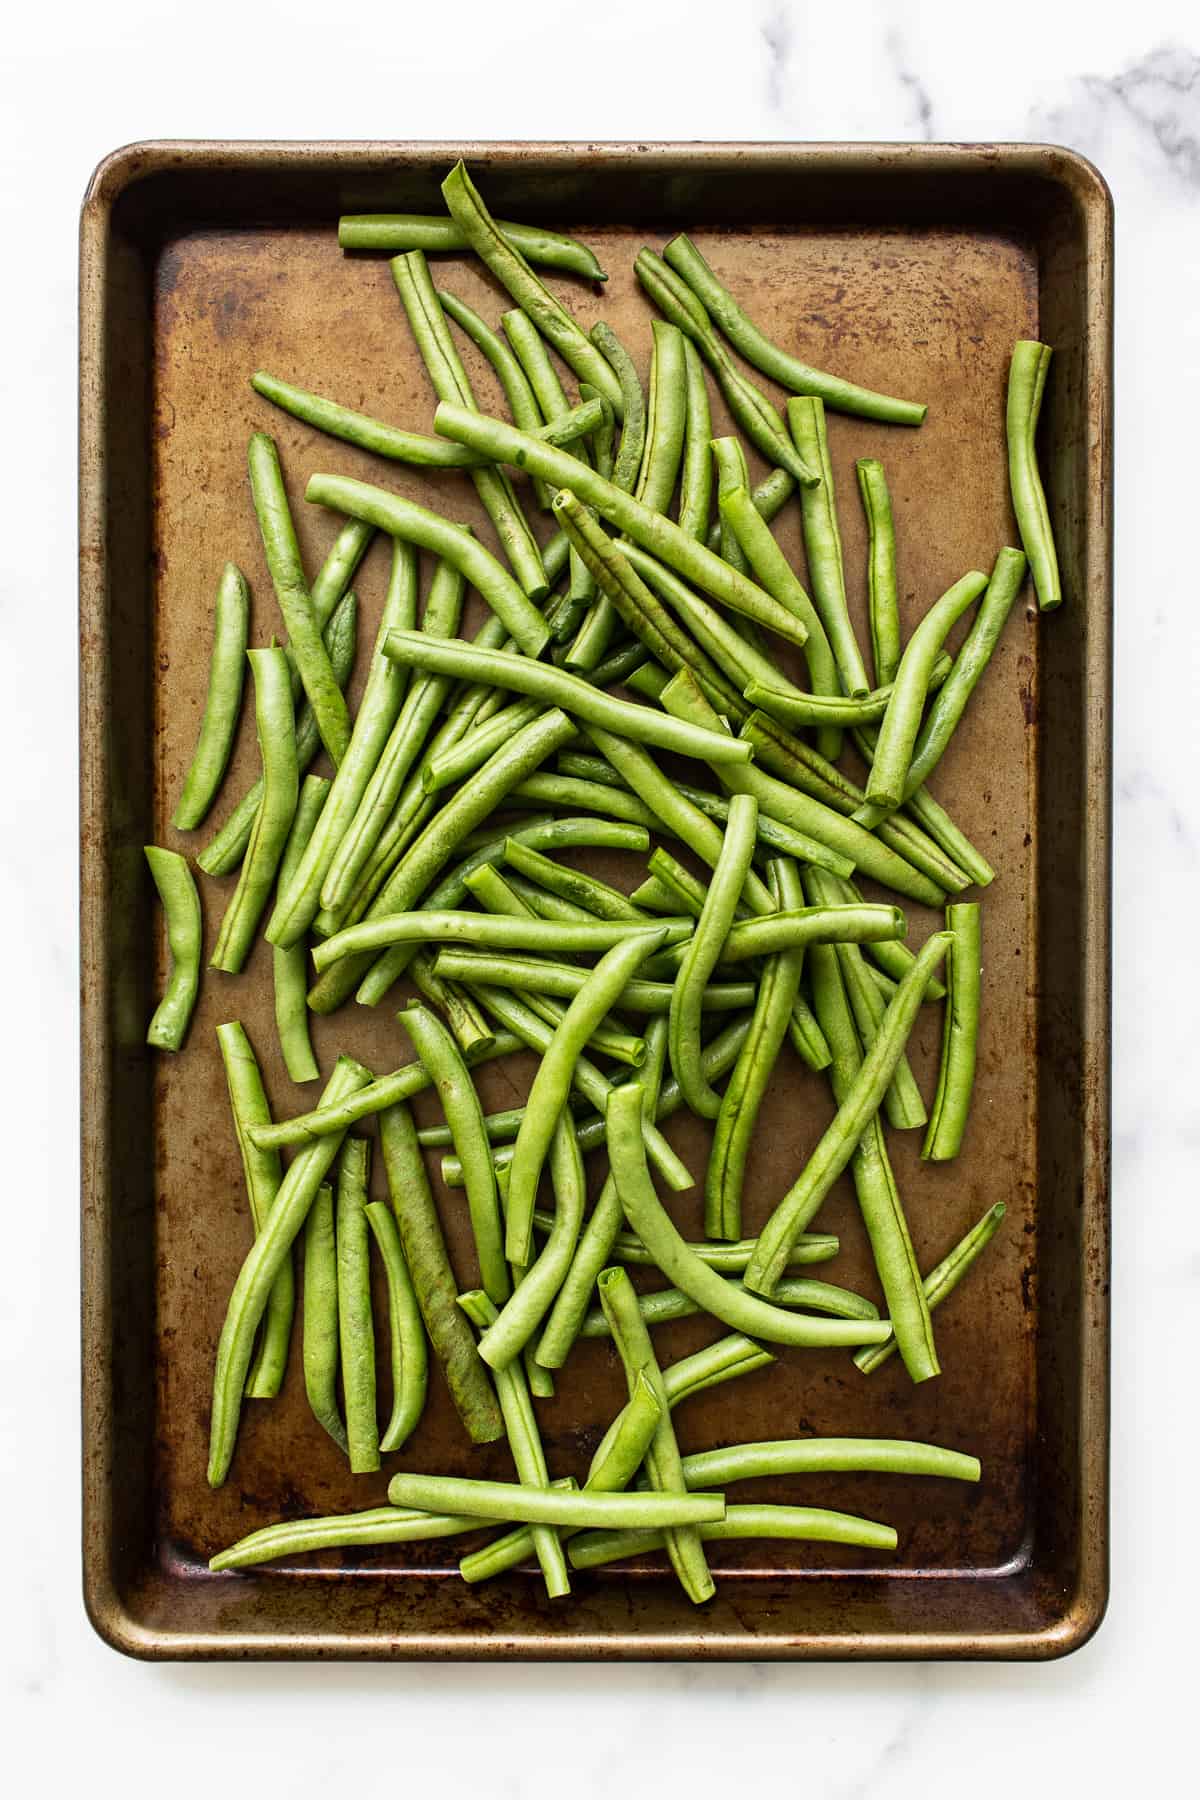 Uncooked green beans on a baking sheet TeamJiX